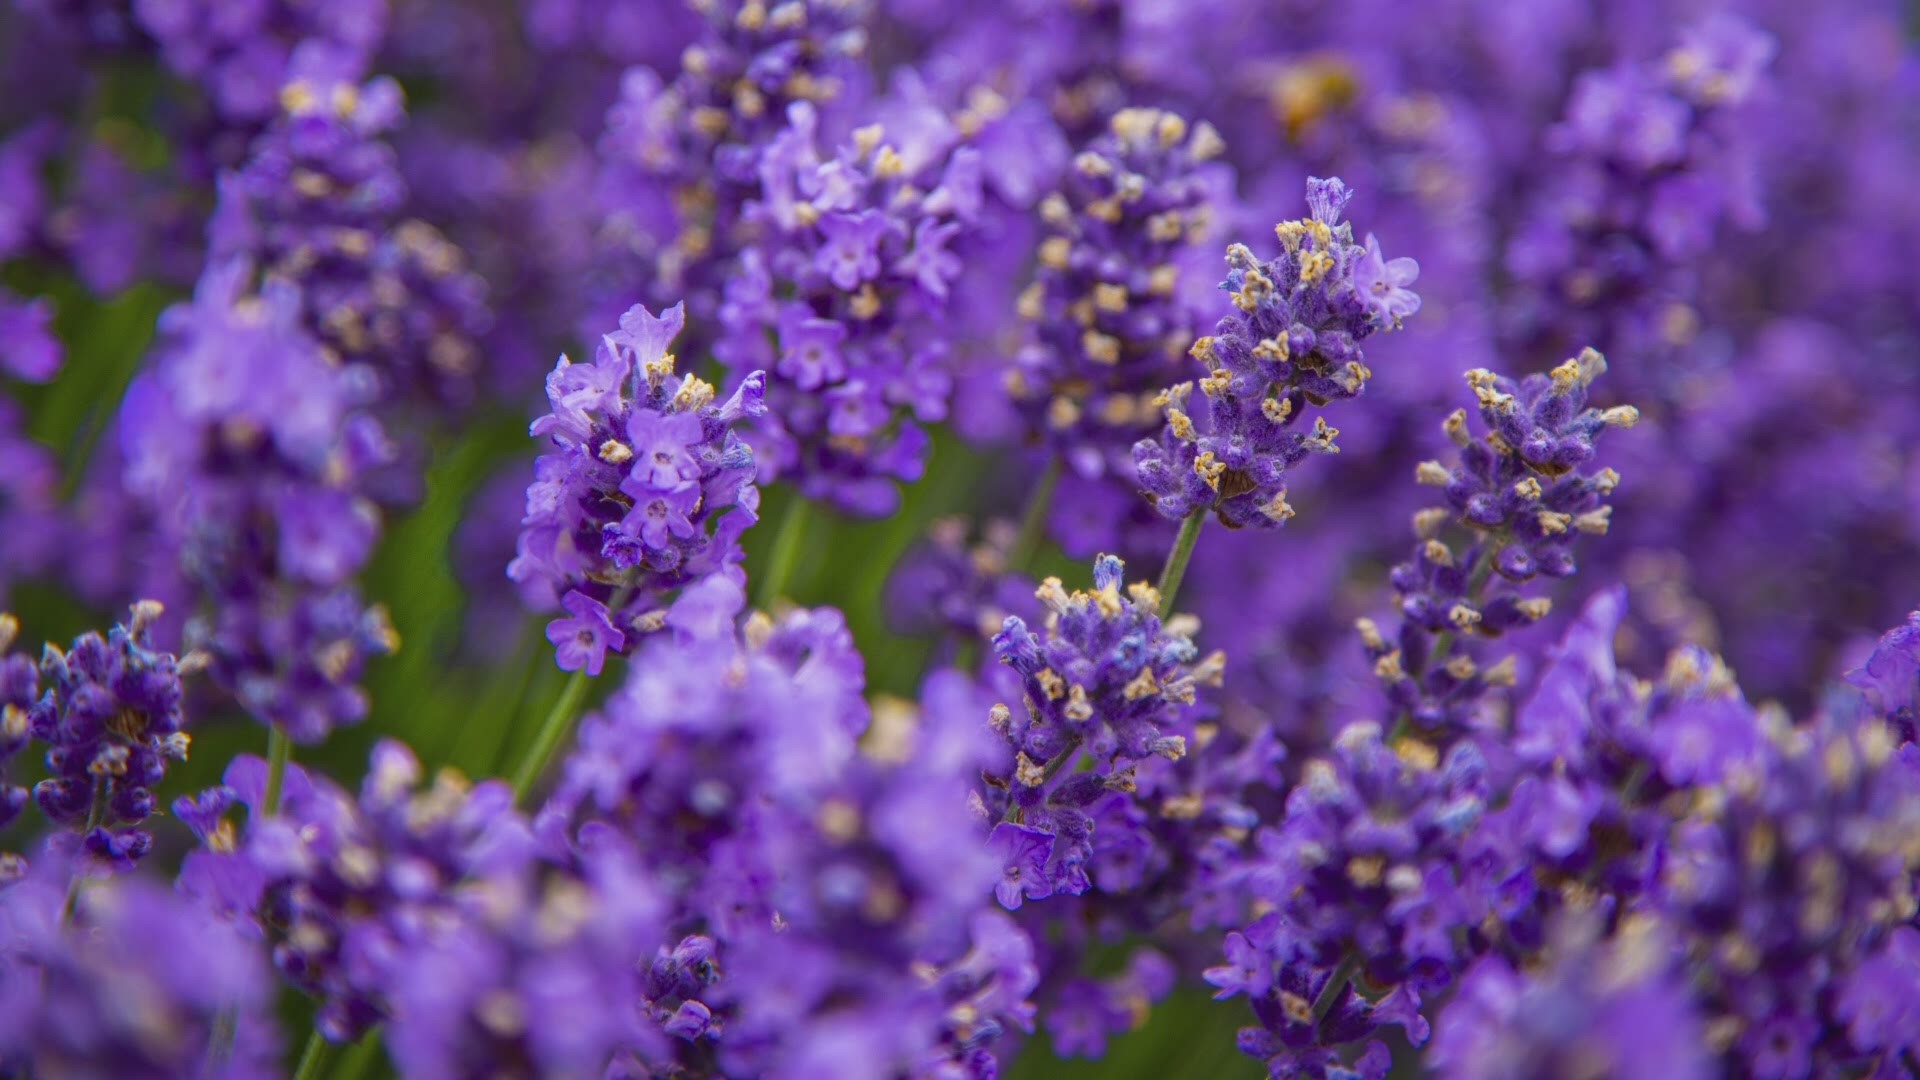 The 16th annual Lavender Festival was canceled, but u-pick farms hope people will head out to enjoy the sunshine, flowers and lavender-infused sno-cones.